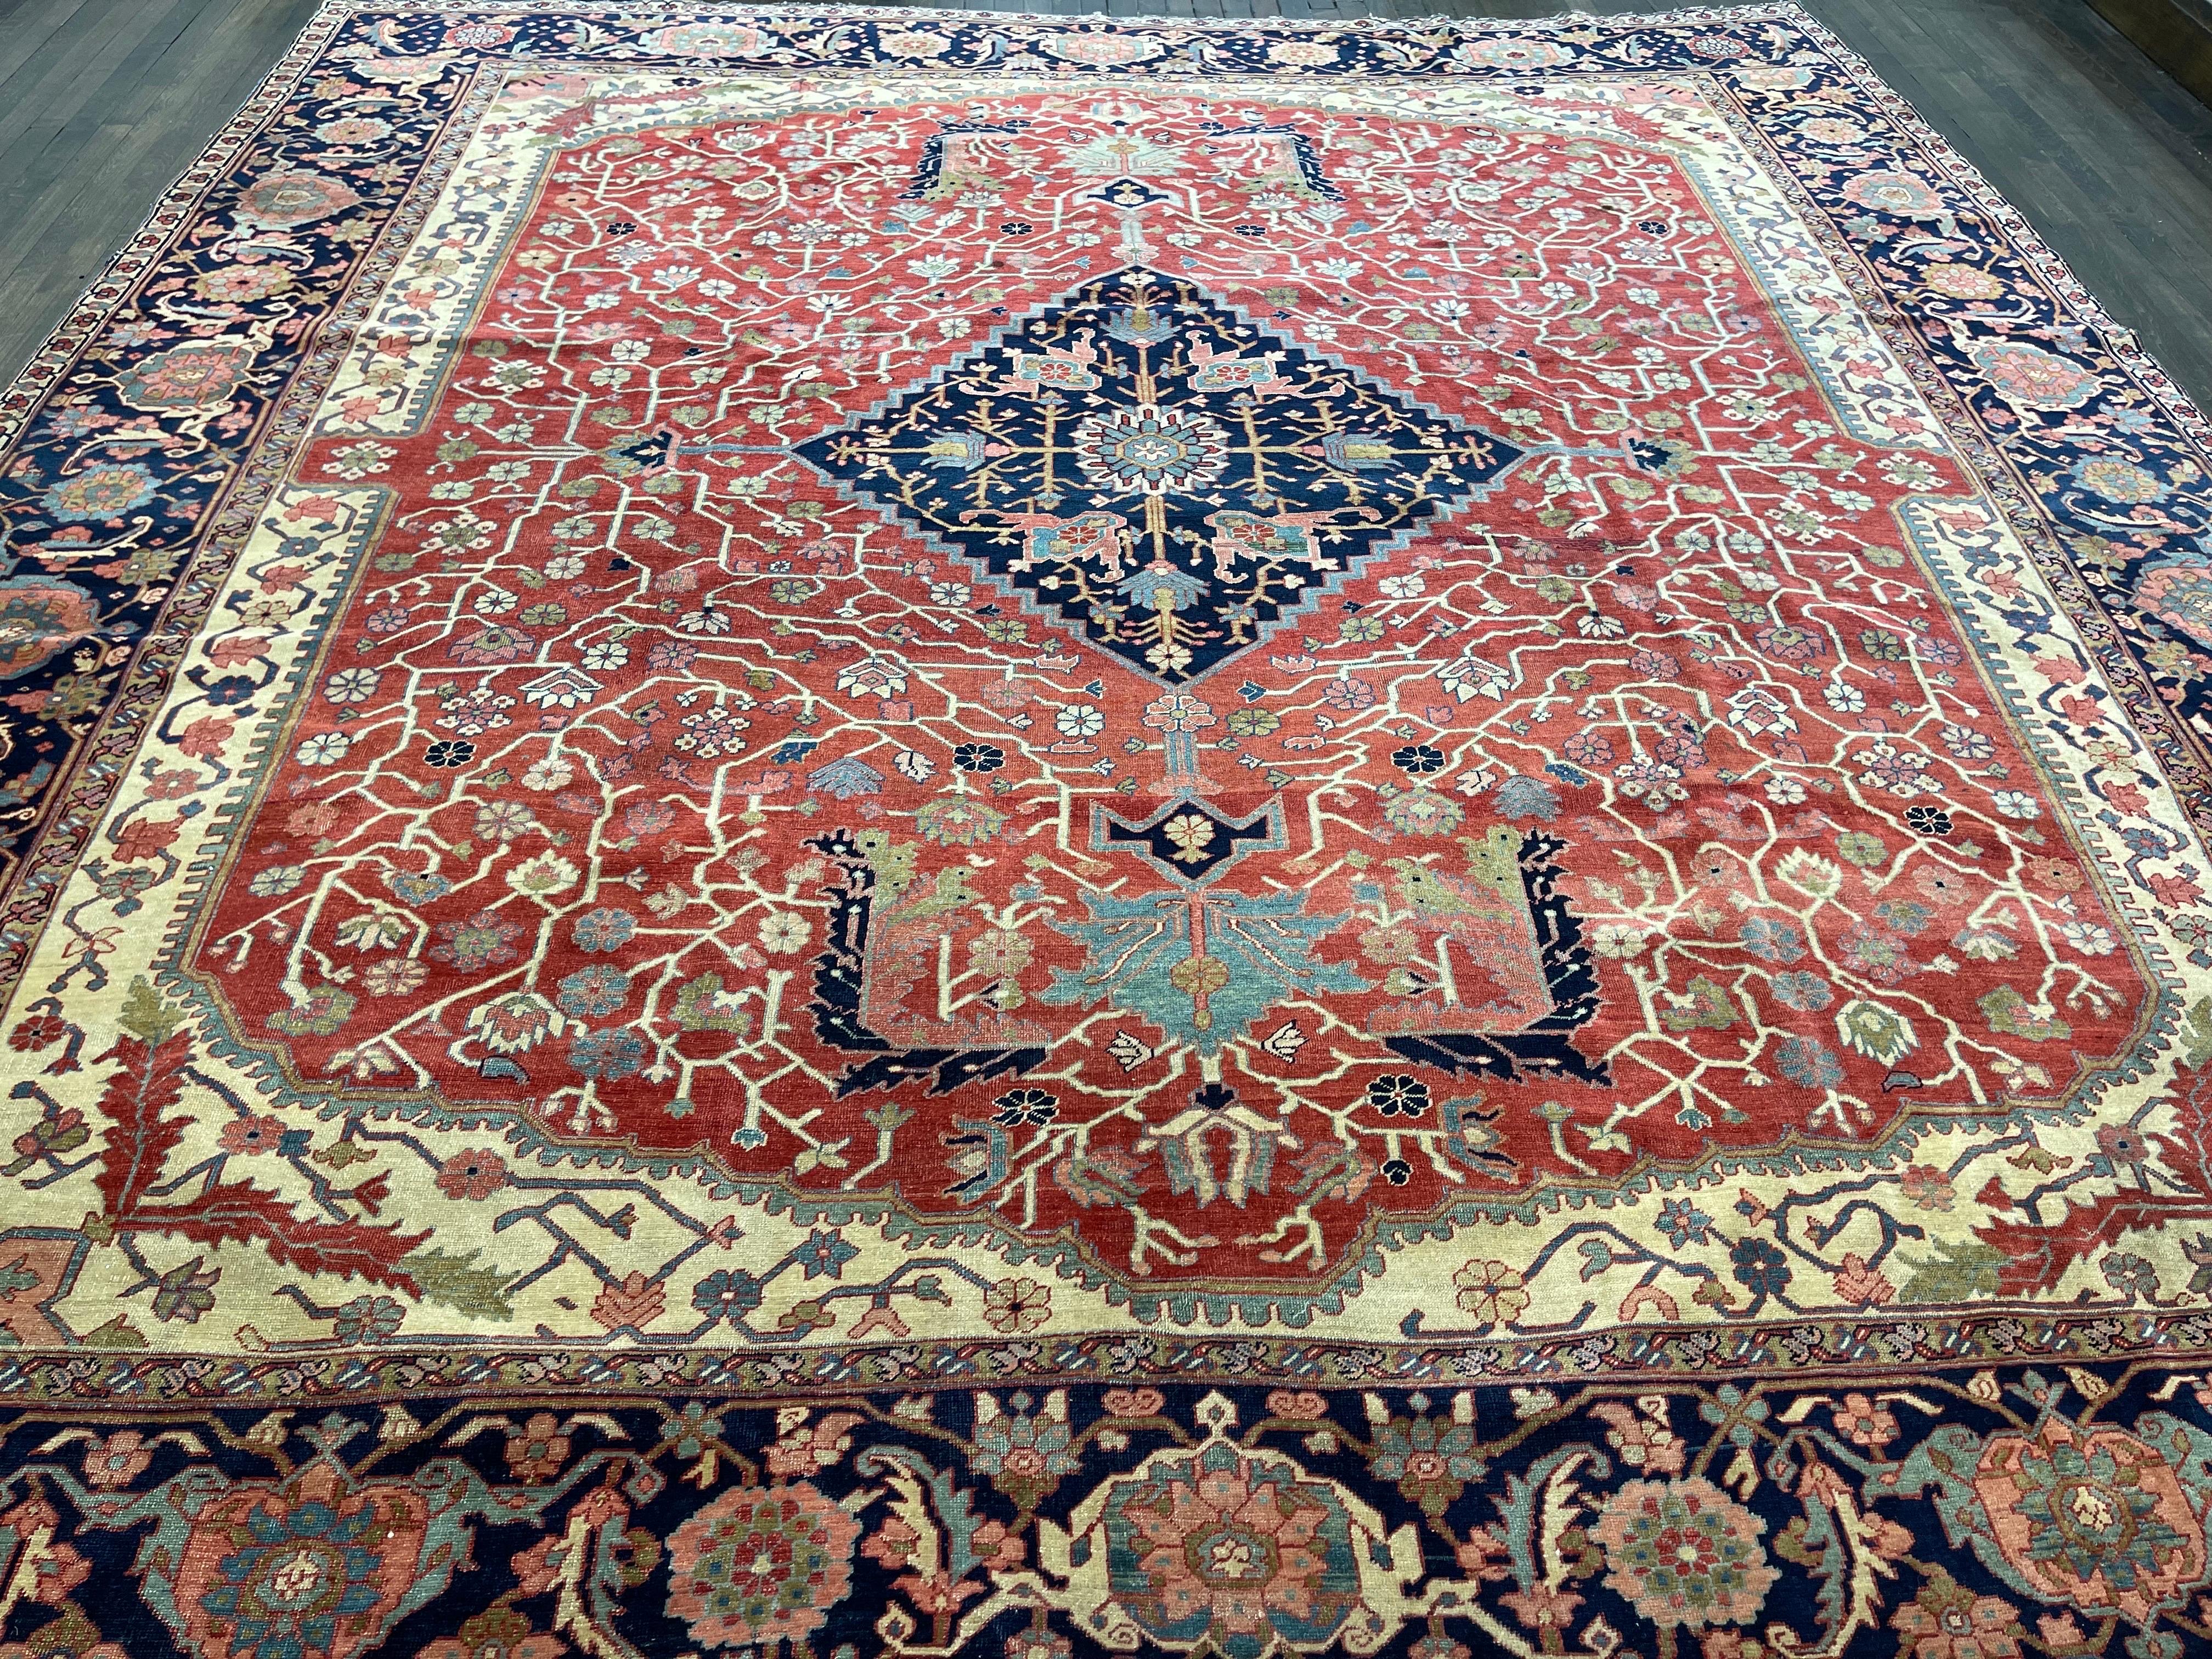 This very unique and one of a kind square rug was hand woven in the area of Serapi located northwest of Persia. Made with hand spun wool and all organic dyes, this rug has a square shaped medallion surrounded by simple,angular vines and spandrel